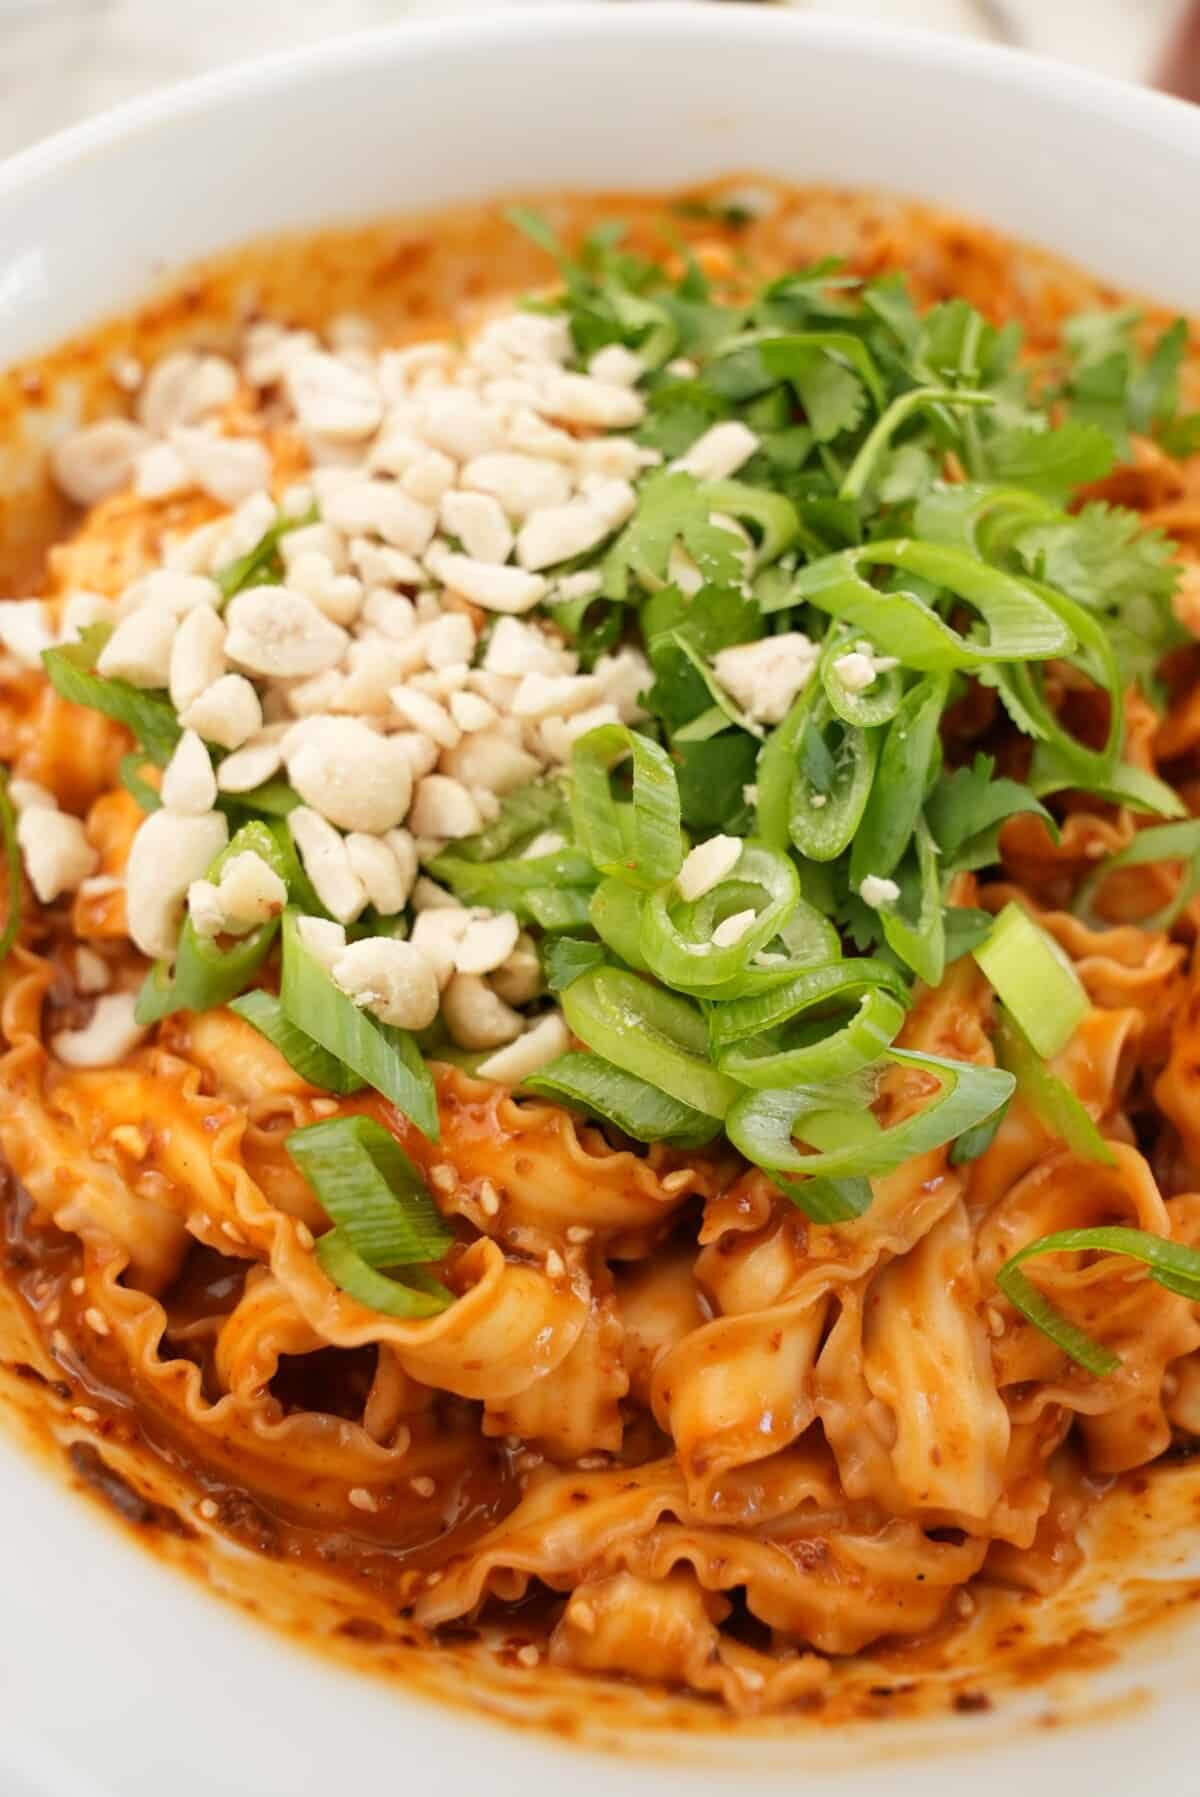 Spicy Peanut Noodles in a bowl topped with peanuts and scallions.